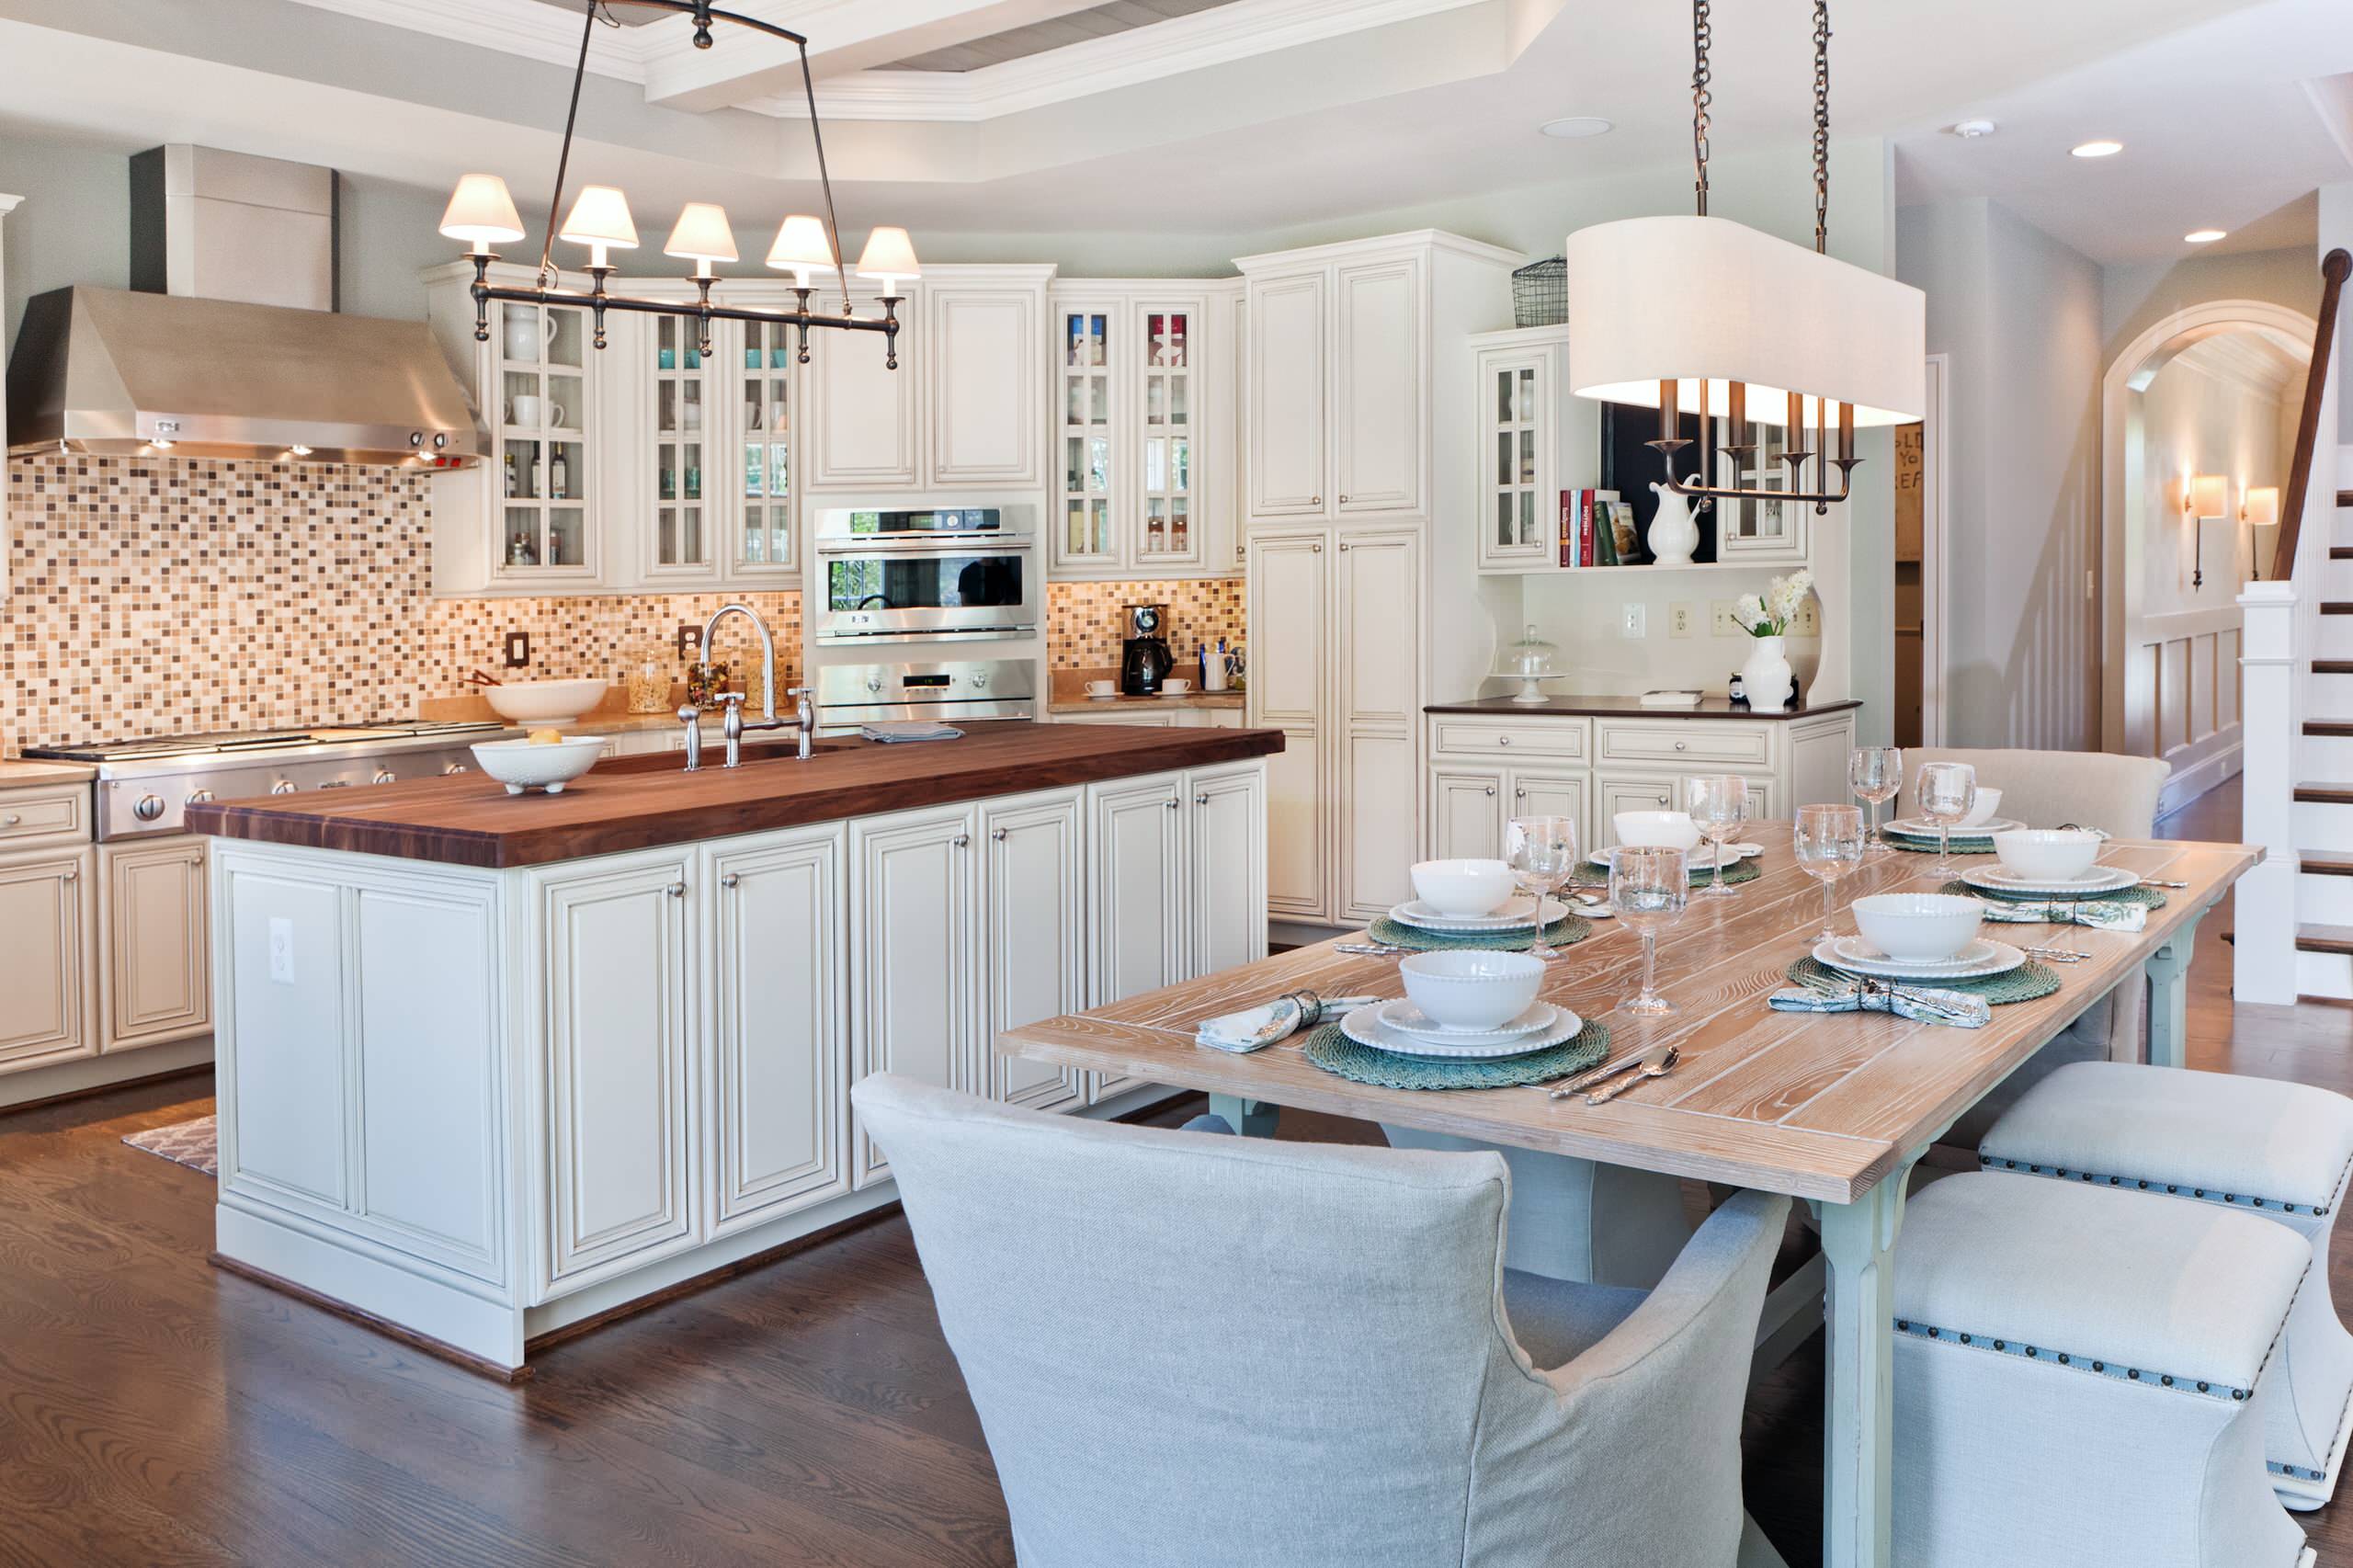 Light Fixtures Over Tables Houzz, Light Fixture For Above Kitchen Table